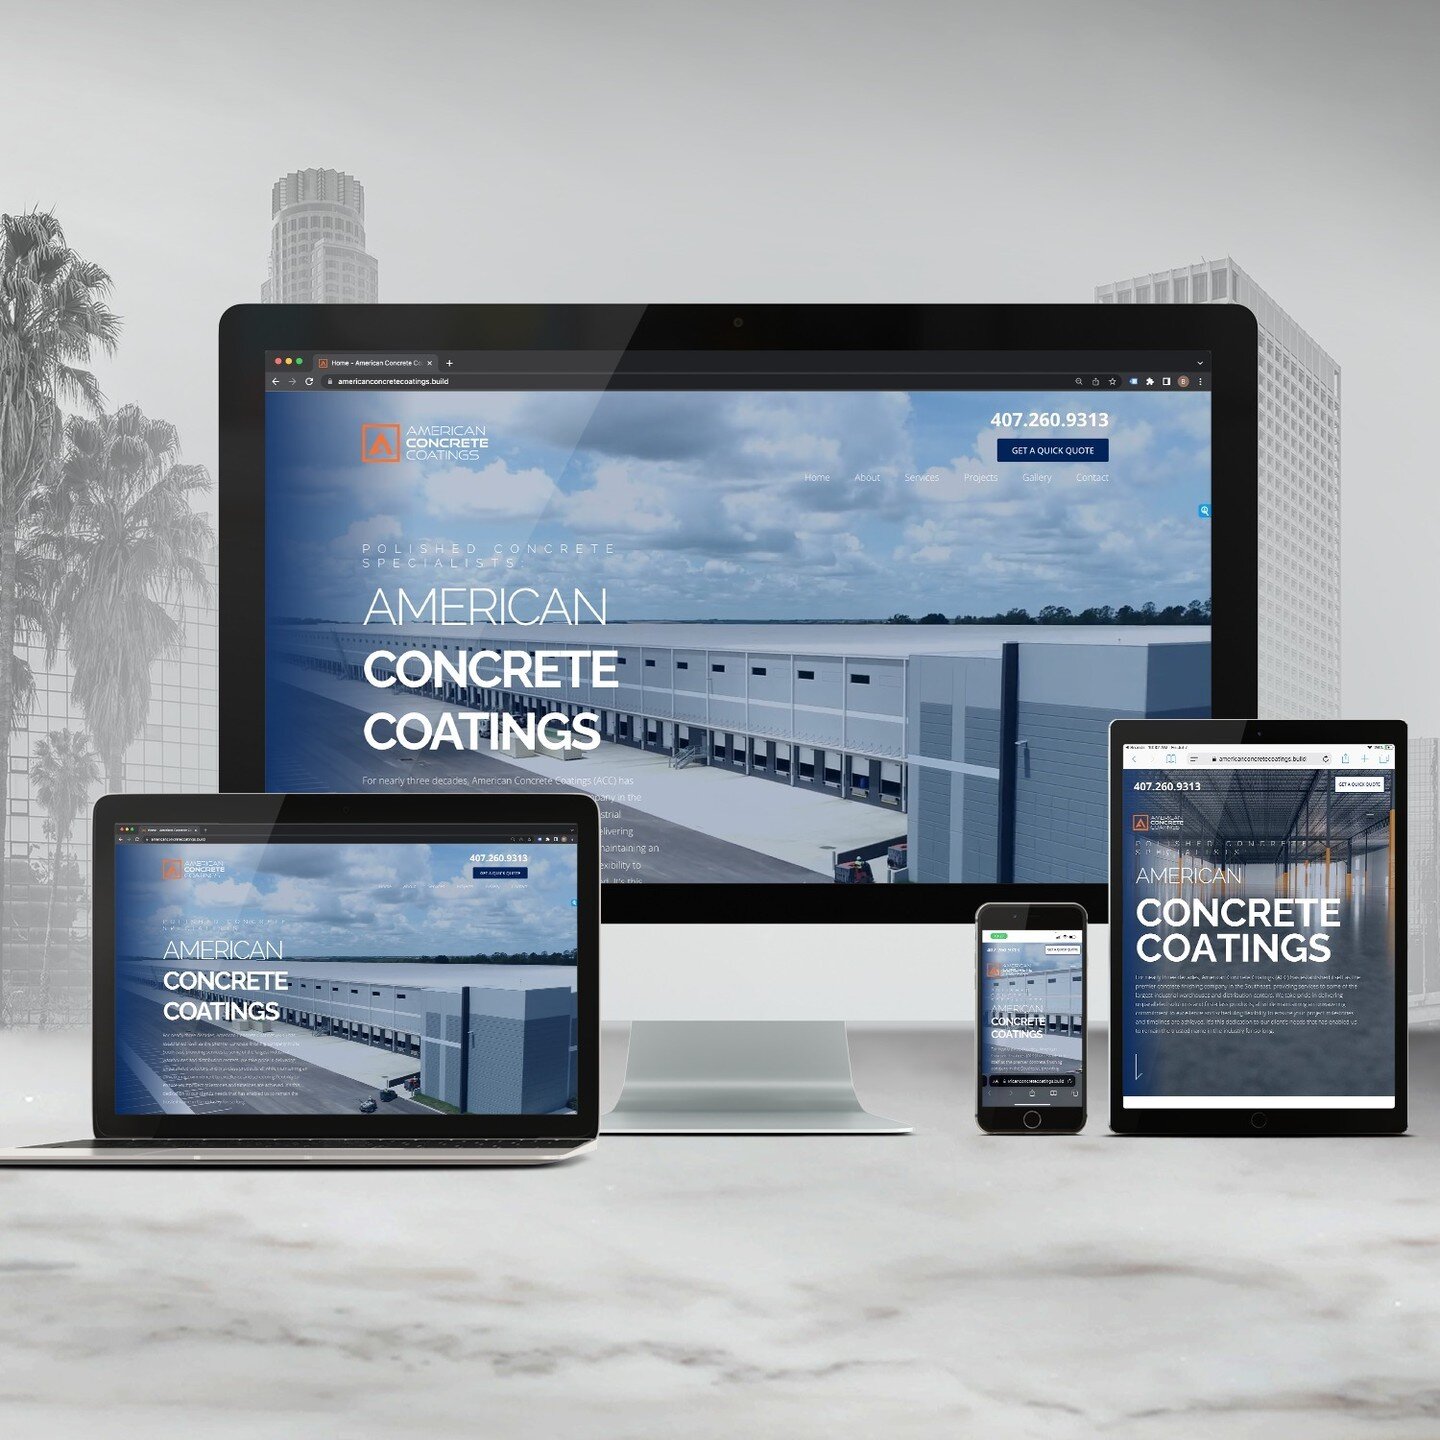 Loving the new site design for American Concrete Coatings! ACC is a regional powerhouse in the concrete finishing space. #websitedesign #lushdigital